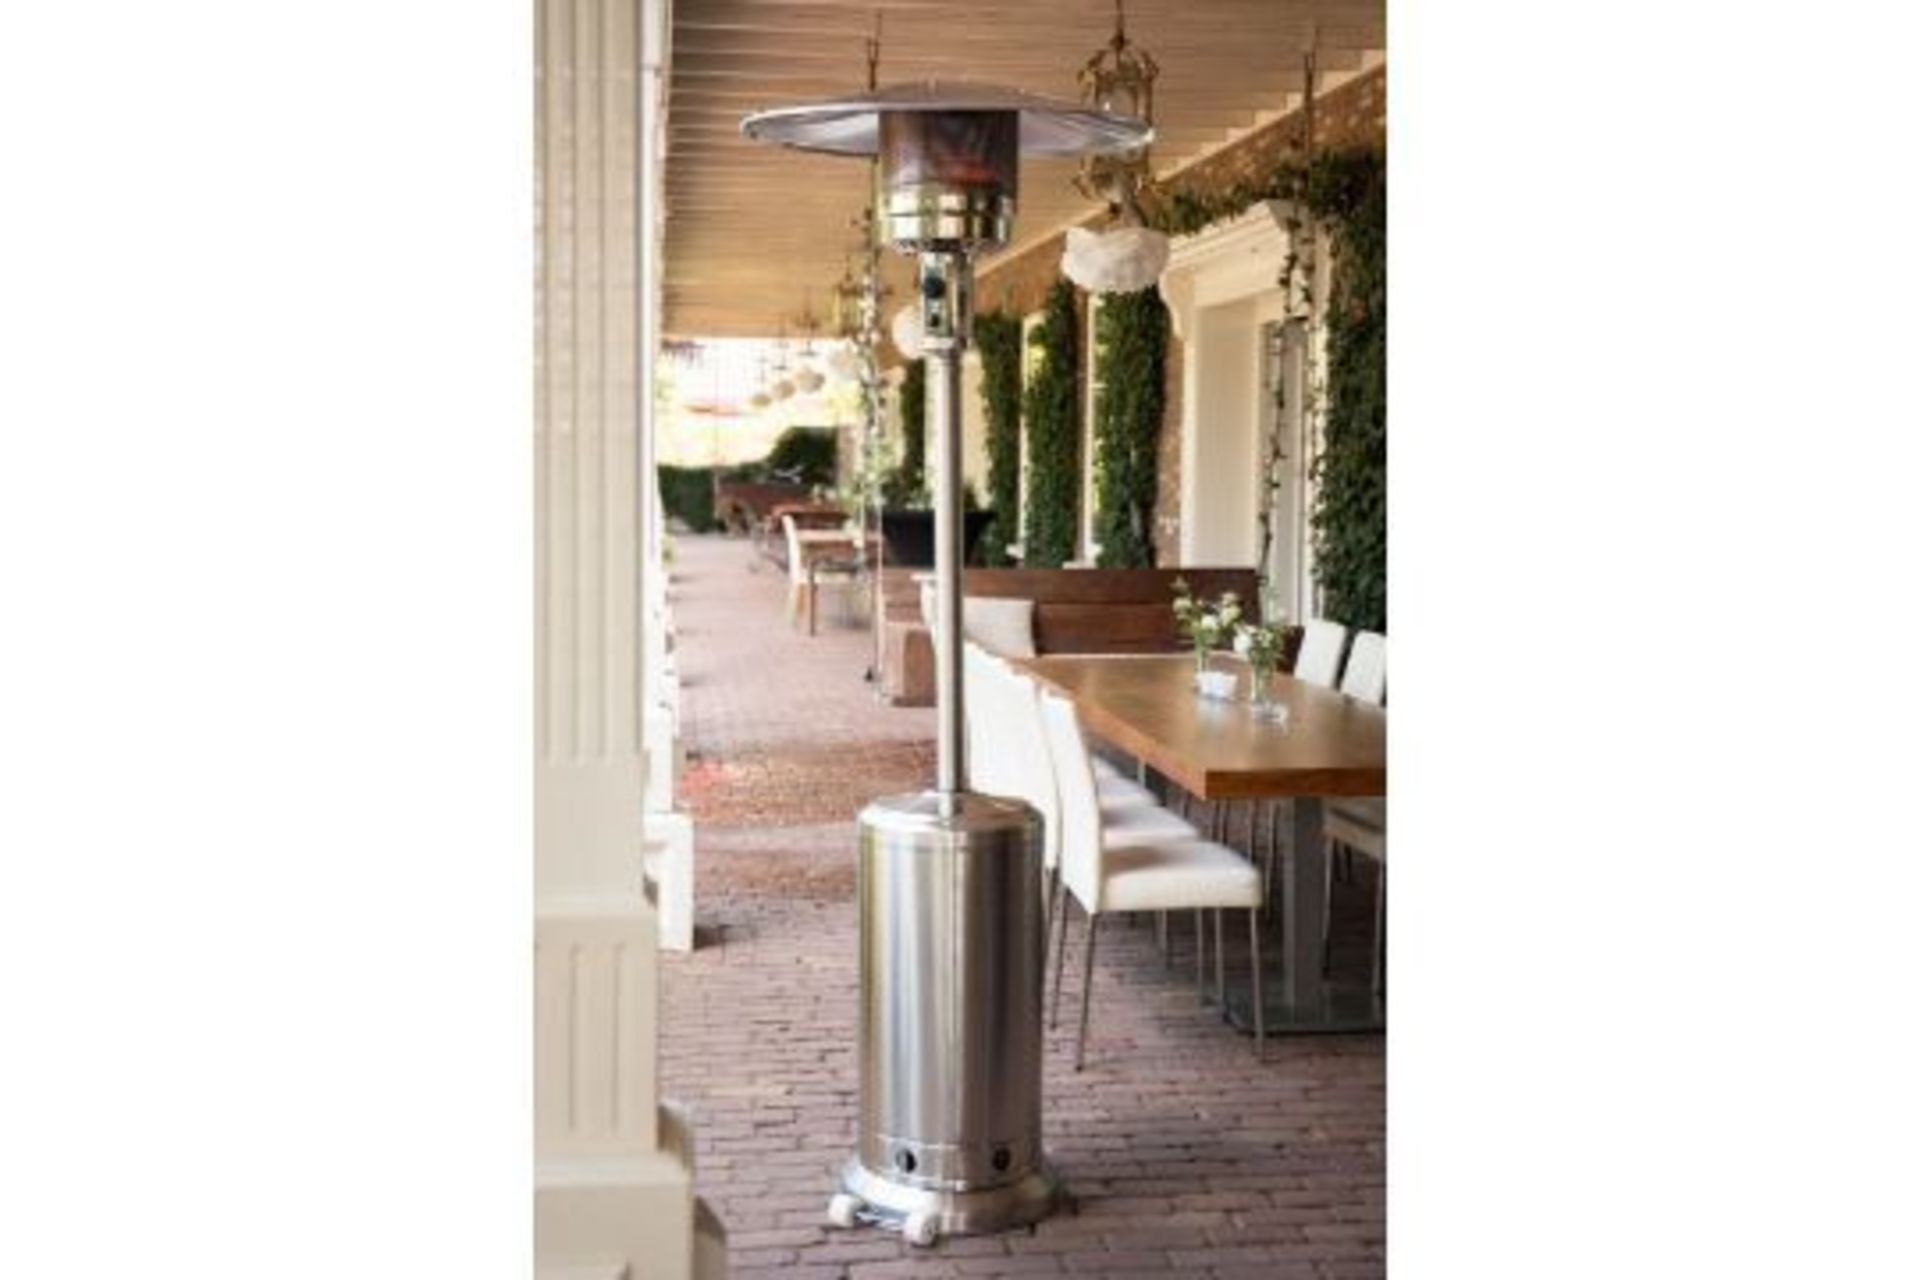 Brand new The Sunred Sargas GH12B is a stylish patio heater RRP £329. With a height of 205 cm it